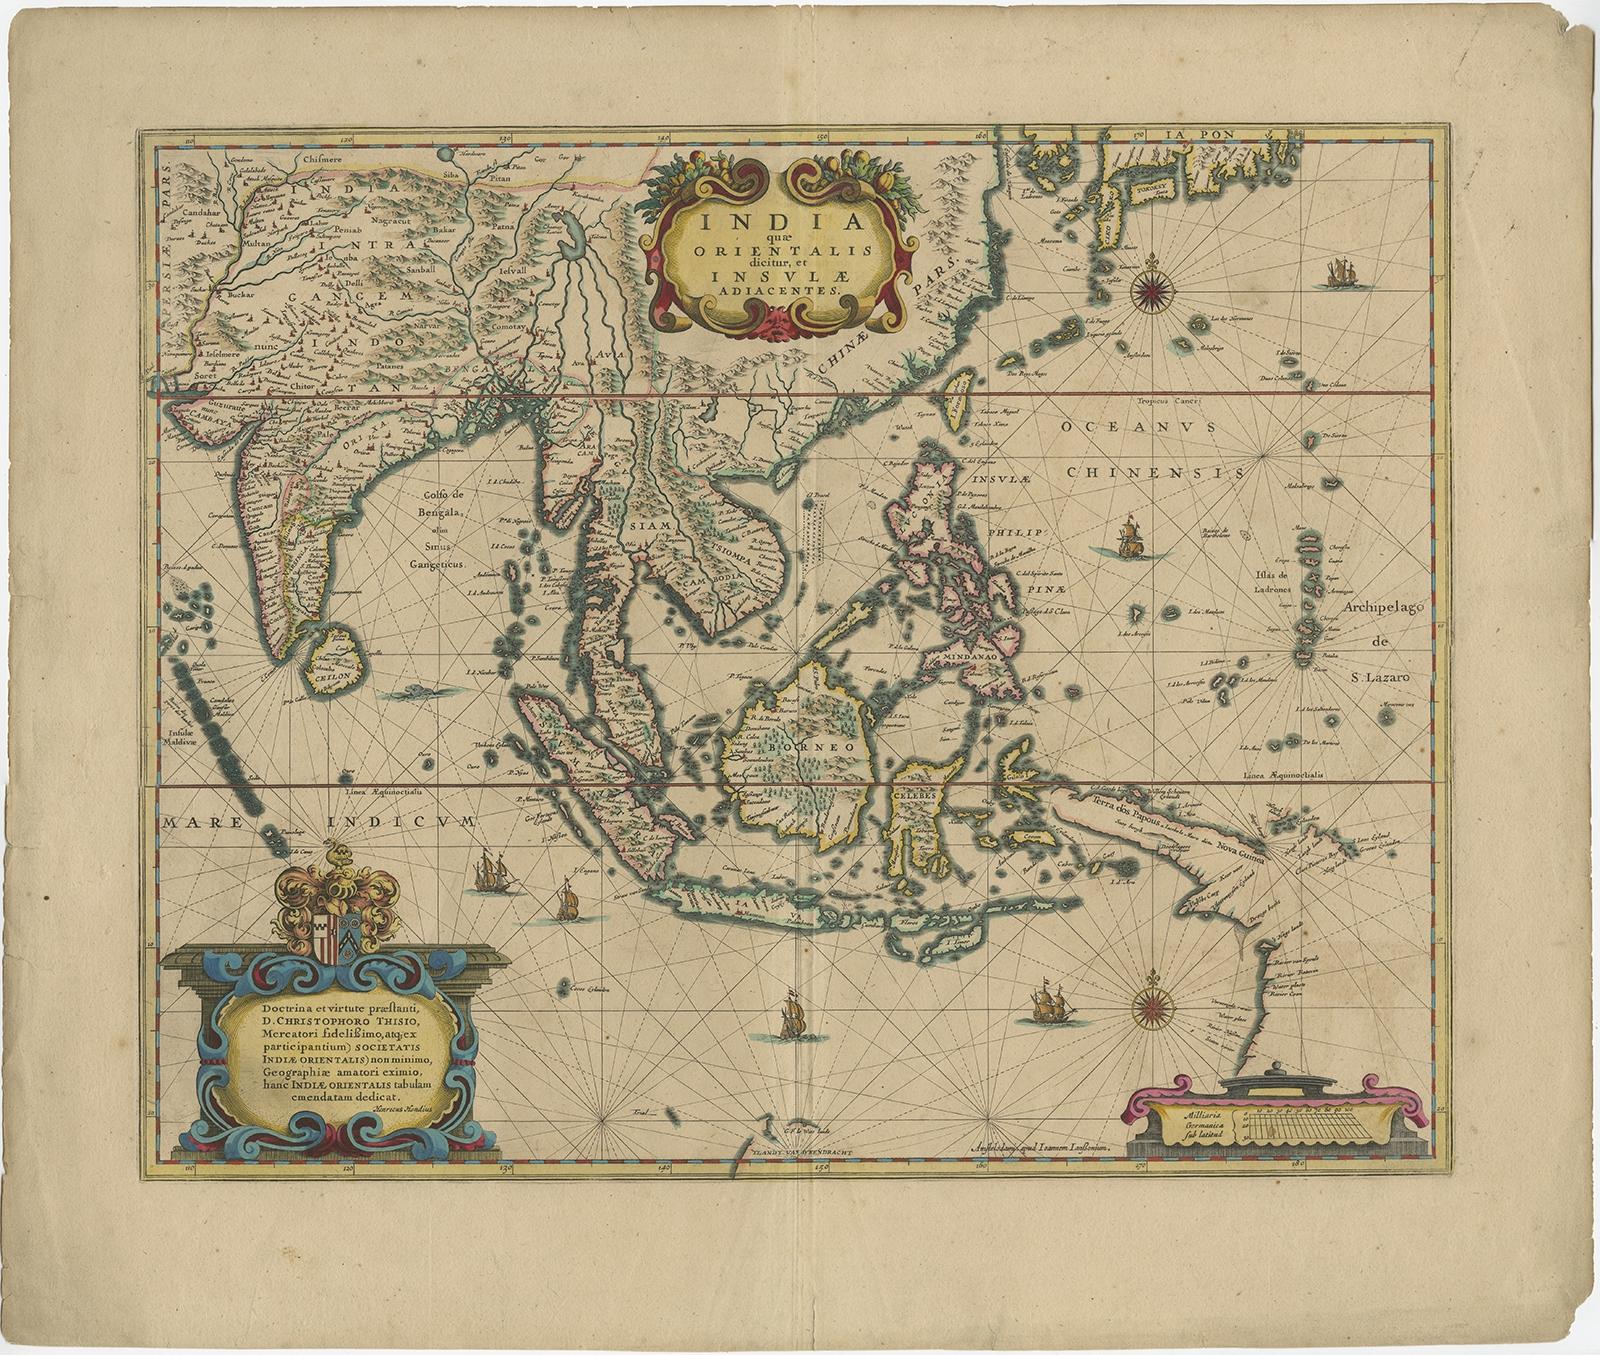 Antique map titled 'India quae Orientalis dicitur, et Insulae adiacentes'. 

Old map of the East Indies and Southeast Asia showing the area between India in the West and parts of Japan, the Marianas and New Guinea/Australia in the East. This map